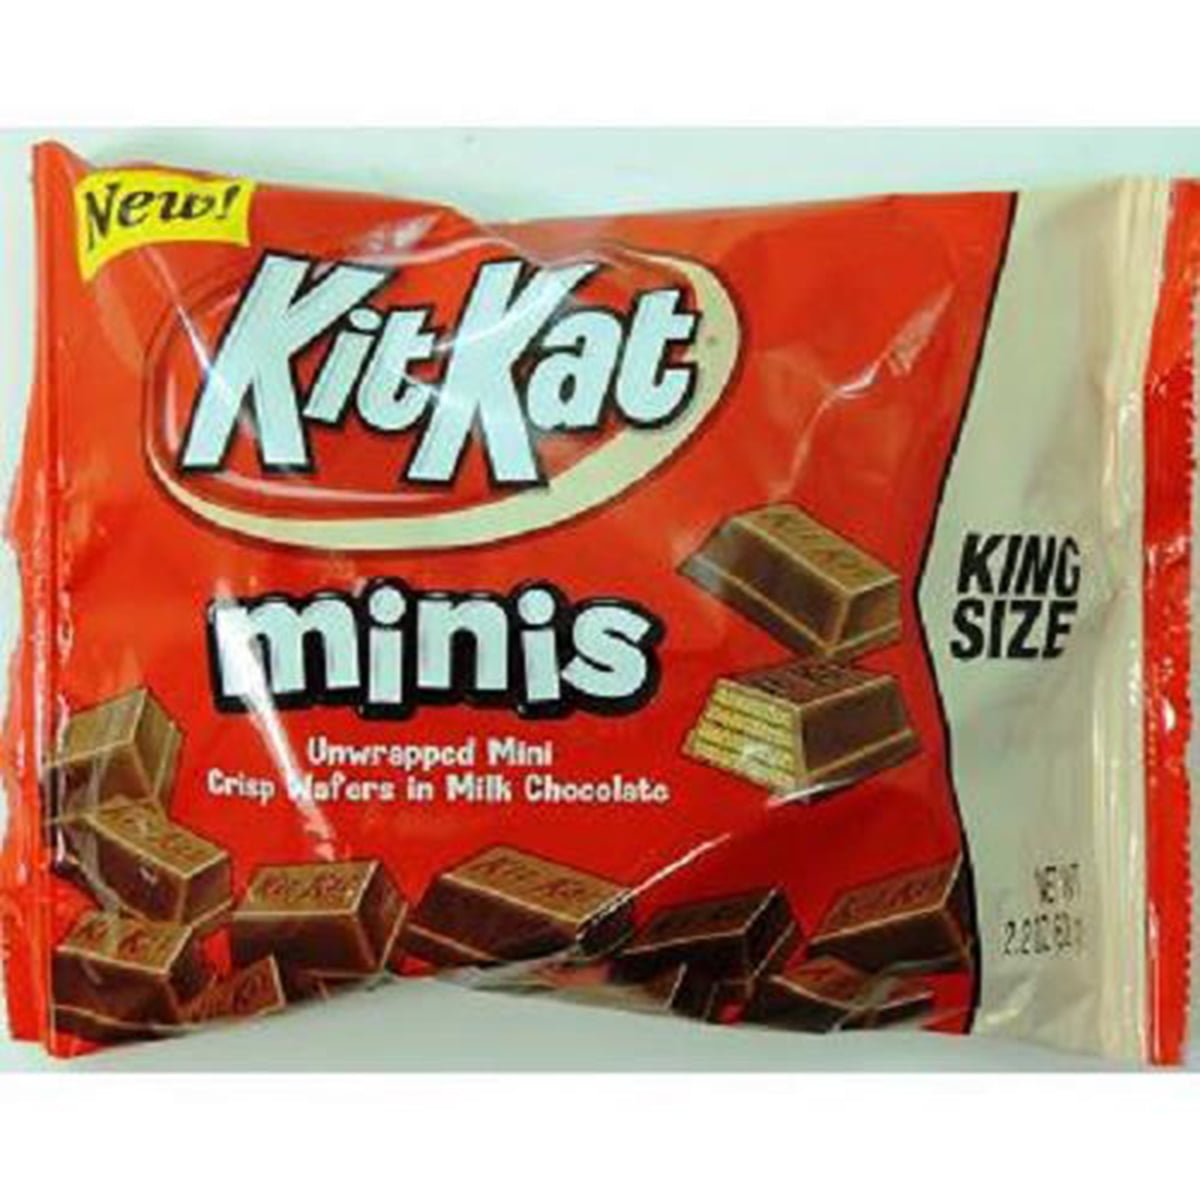 KIT KAT® Minis, Unwrapped Milk Chocolate Wafer Candy Bars, Movie